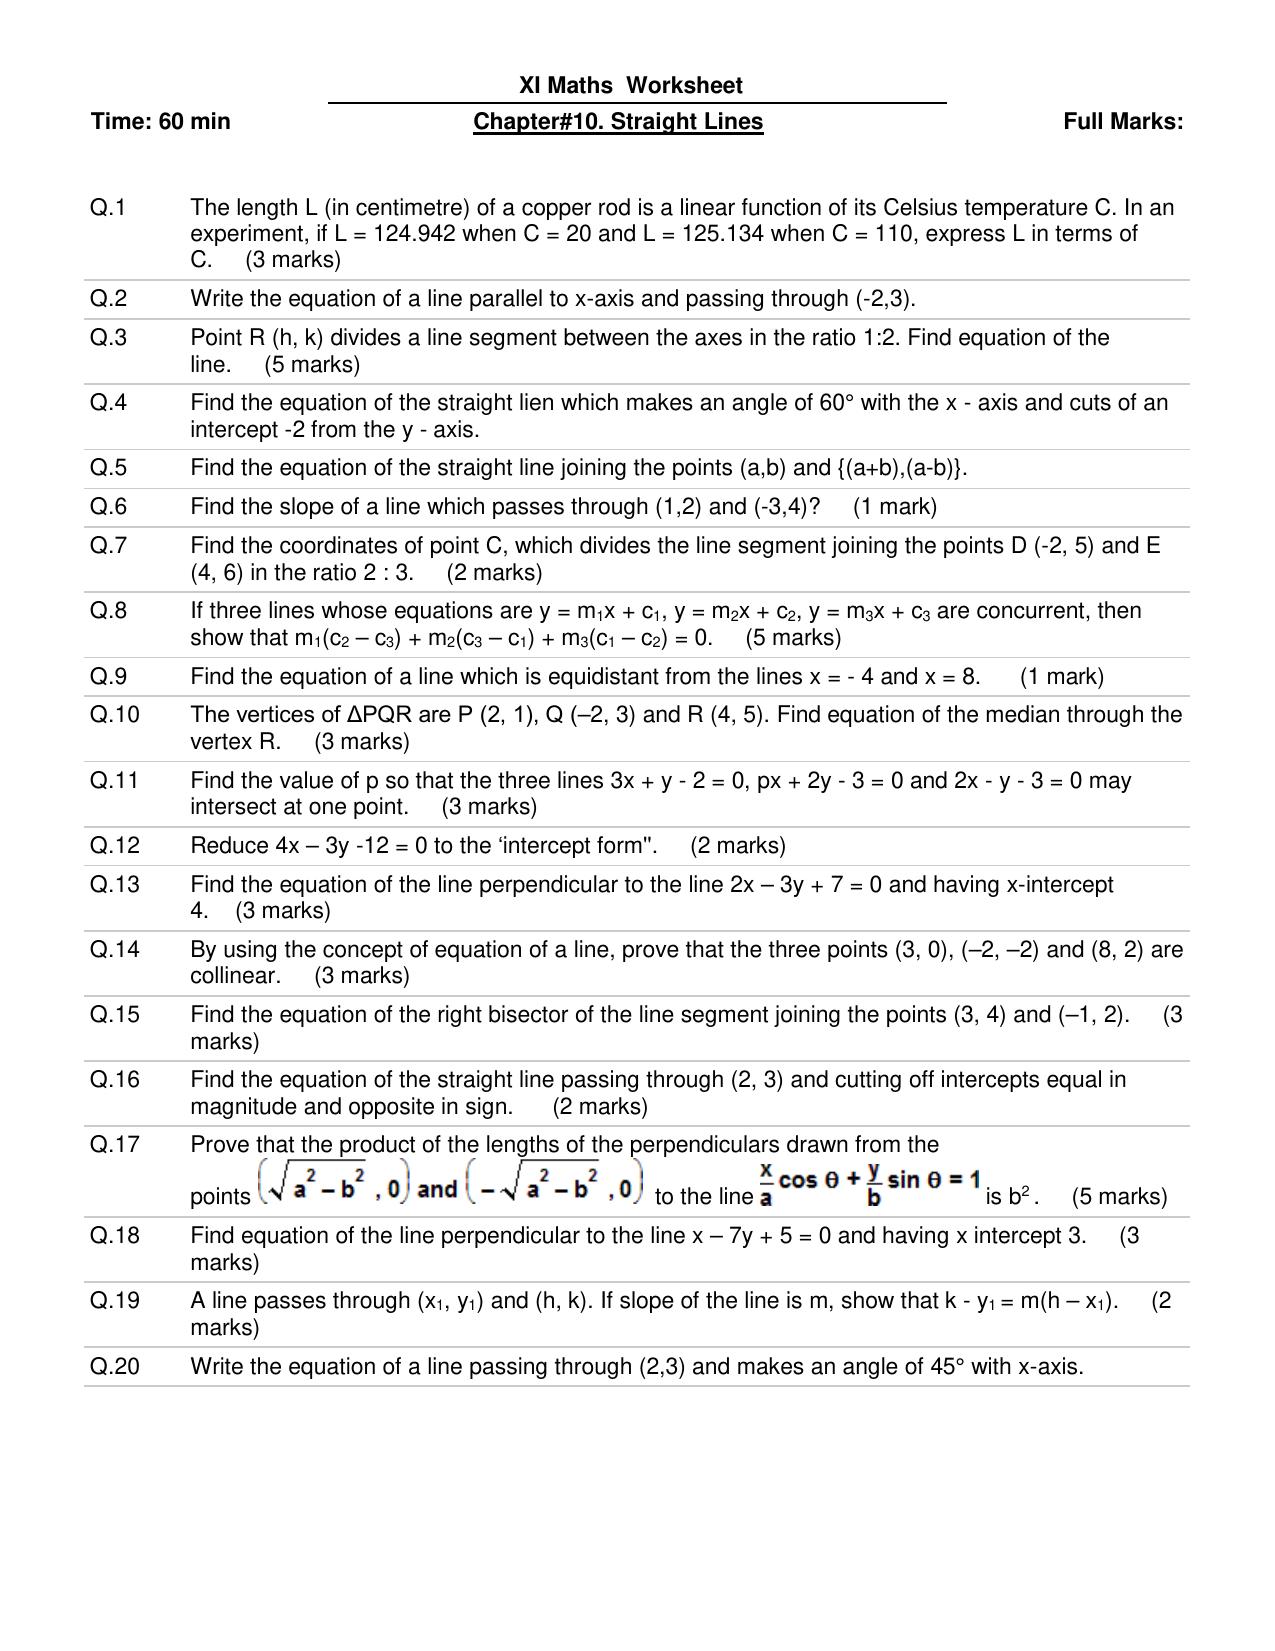 CBSE Worksheets for Class 11 Mathematics Straight Lines Assignment 1 - Page 1